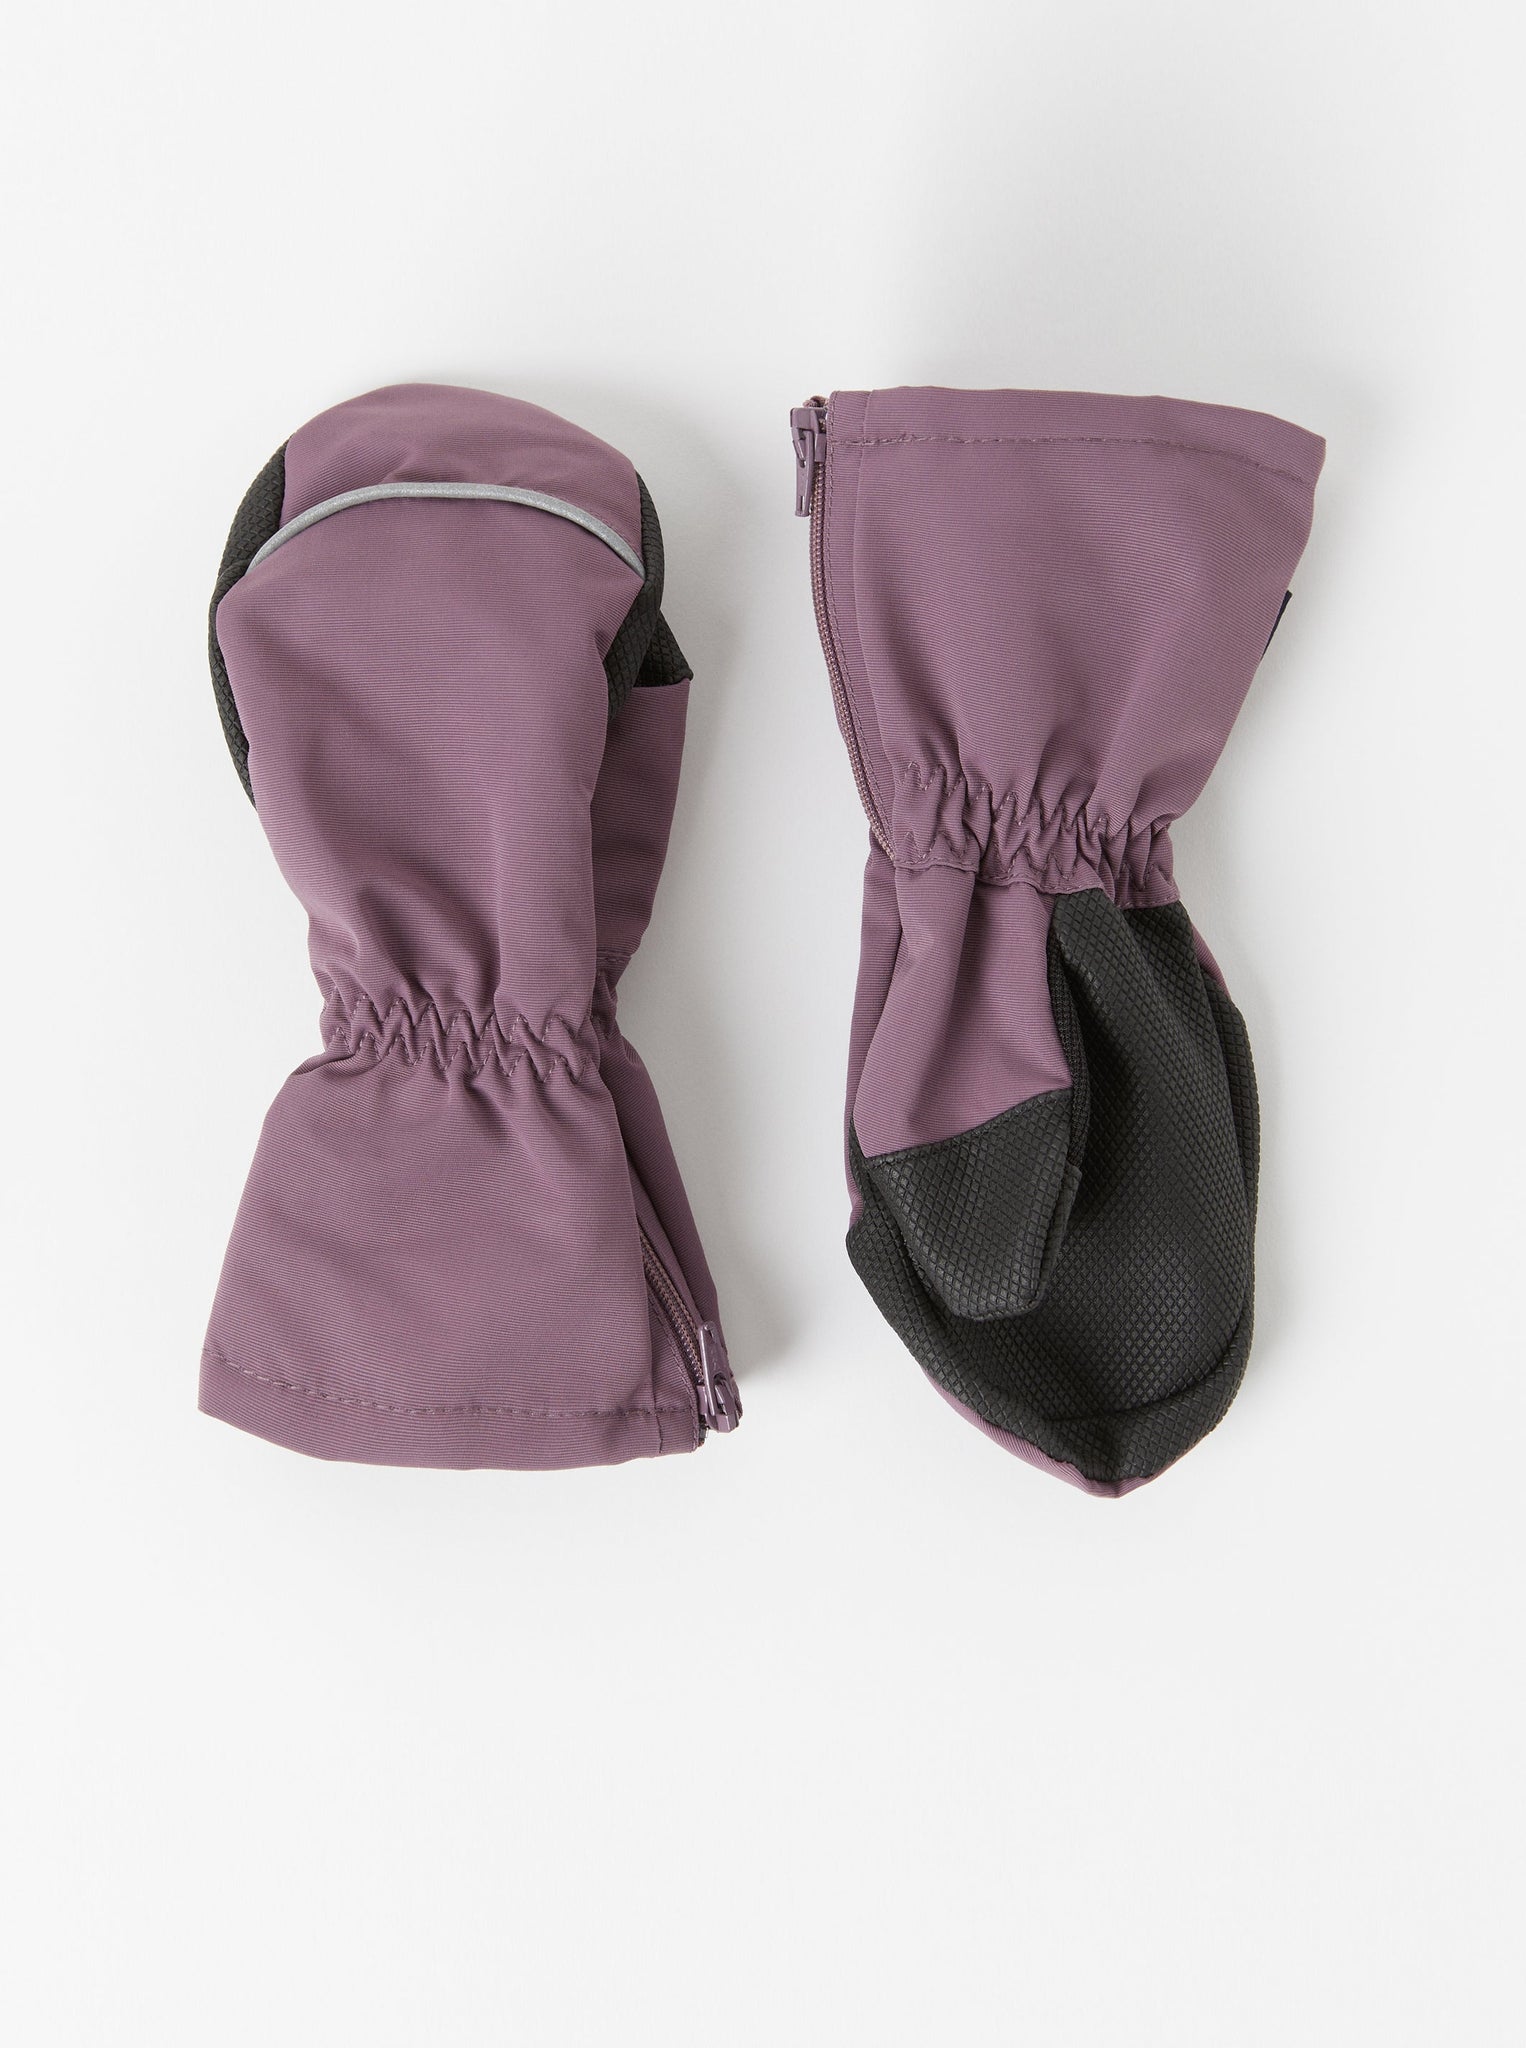 Purple Waterproof Kids Mittens from the Polarn O. Pyret kidswear collection. Ethically produced outerwear.